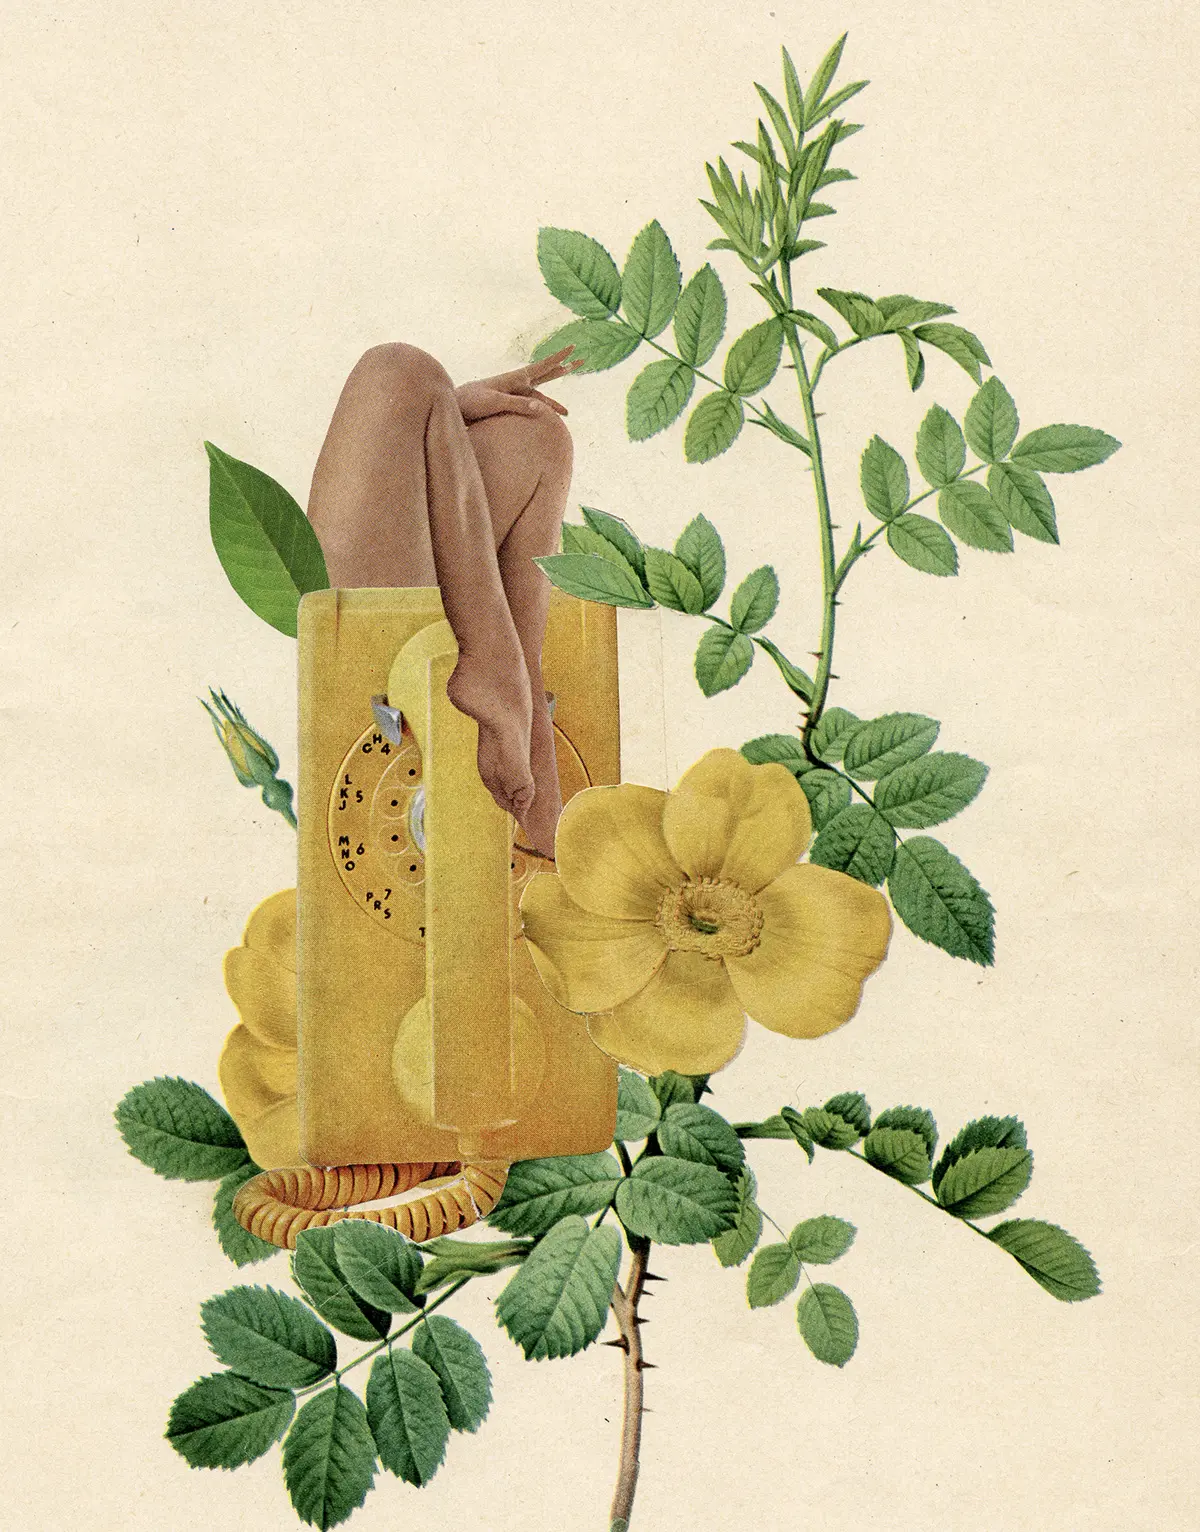 A woman's legs emerge from behind a yellow 1970's wall phone perched on a shoot of blossoming roses.